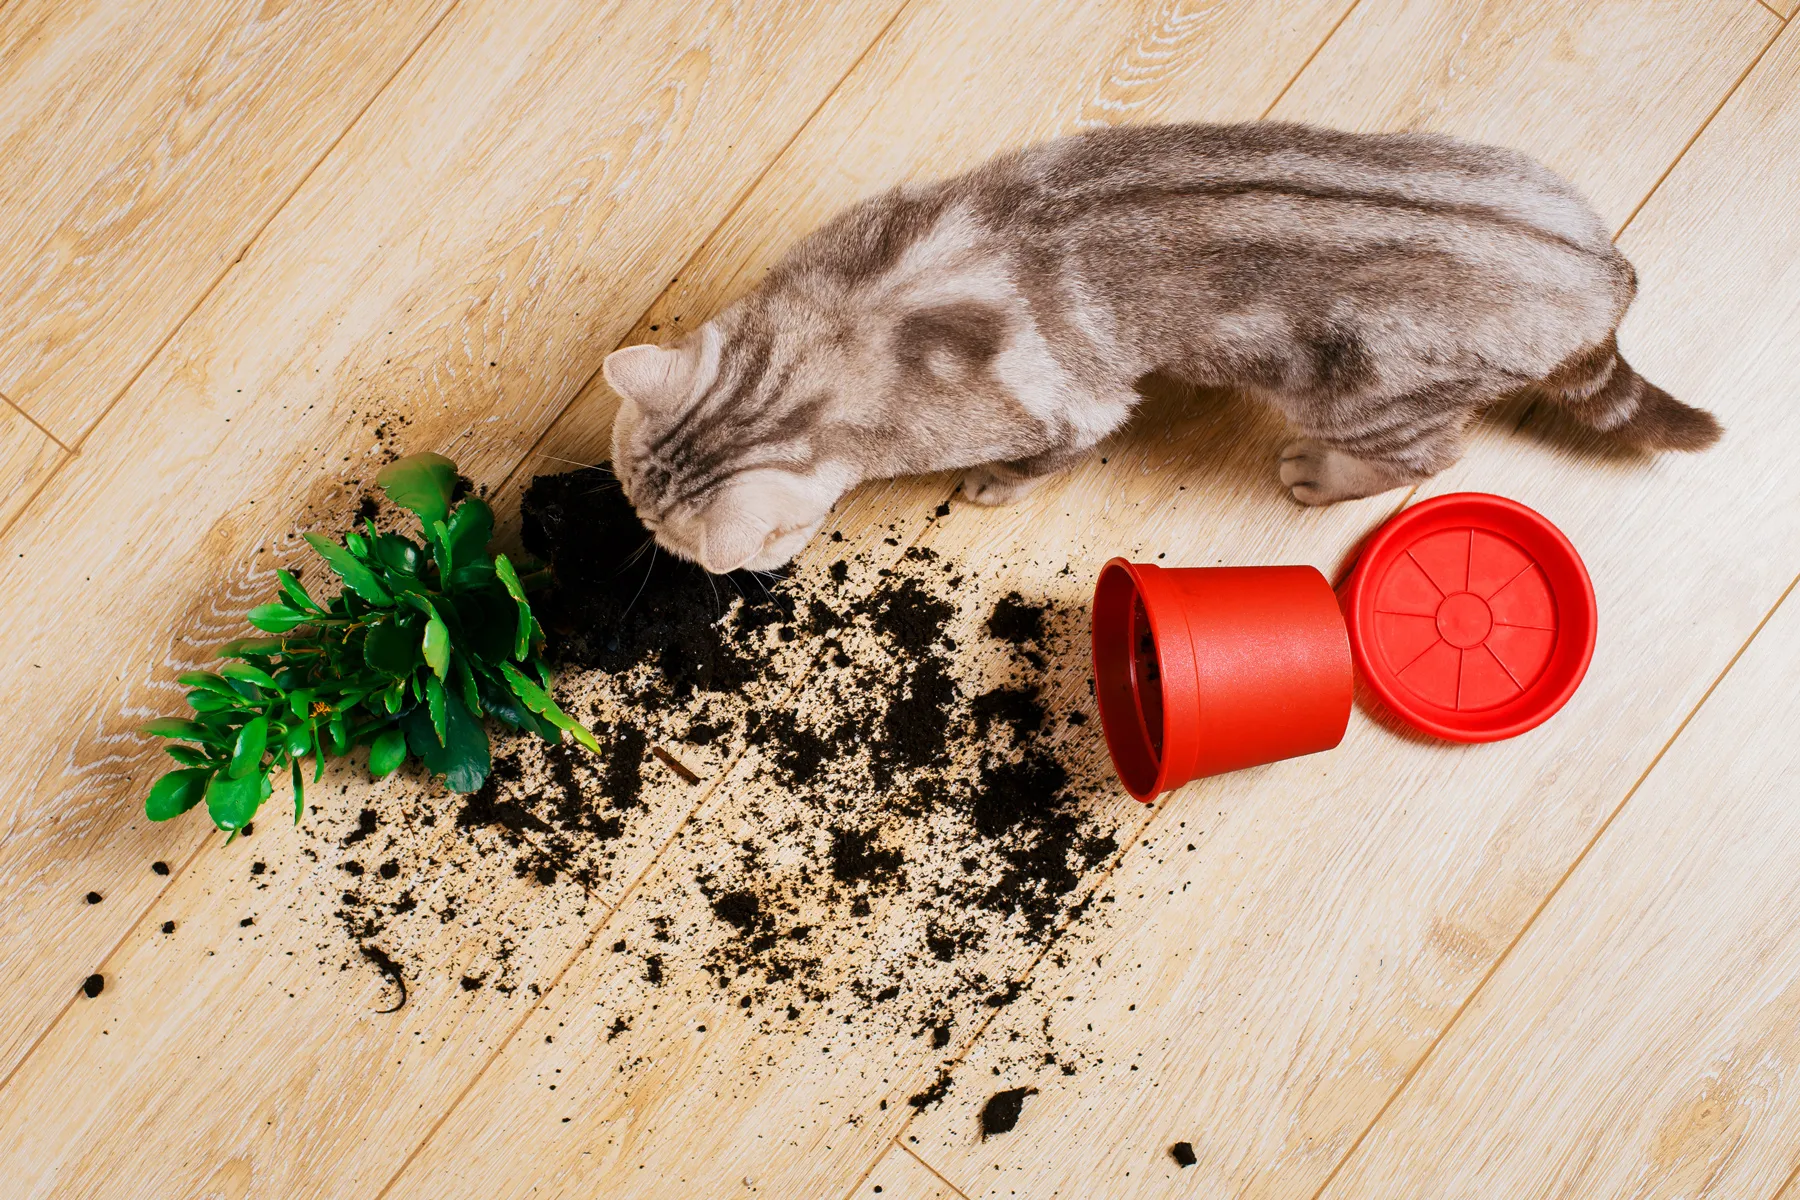 is it dangerous for dogs to eat cat poop